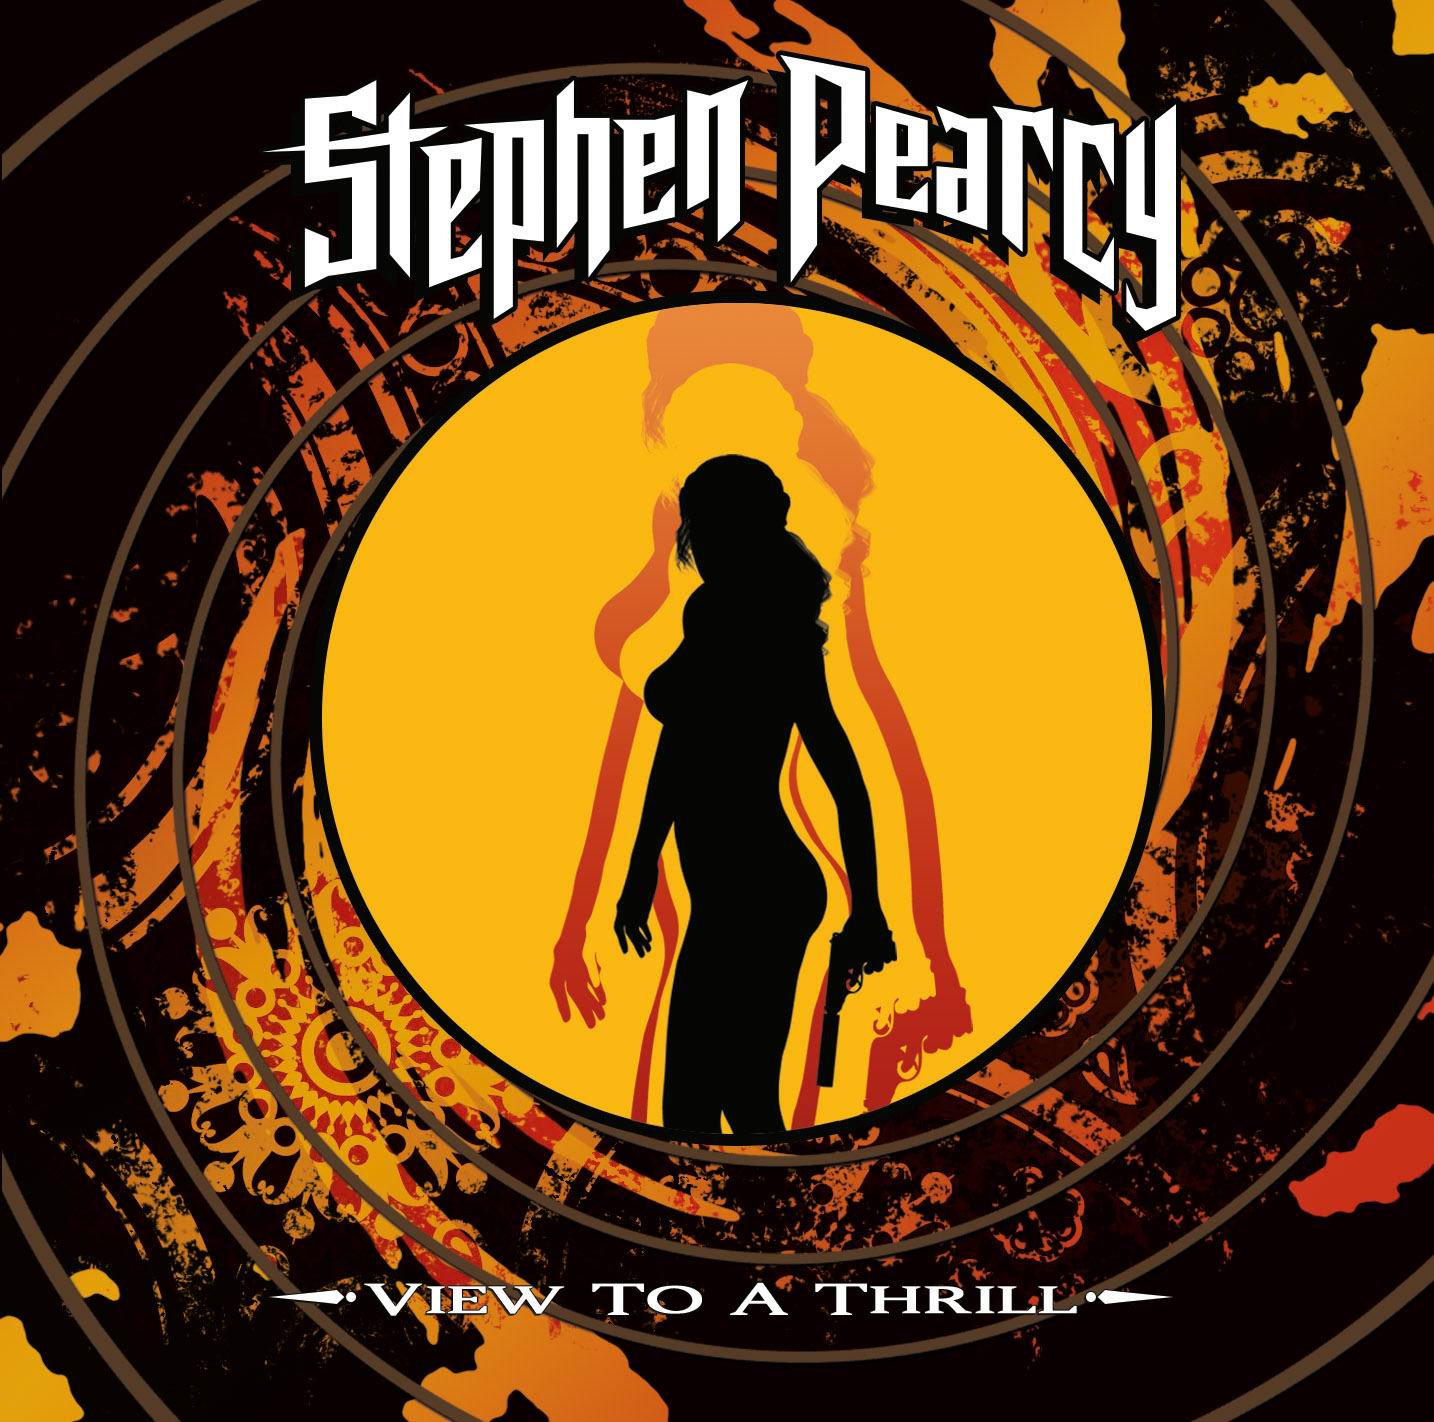 Stephen Pearcy - 'View To Thrill